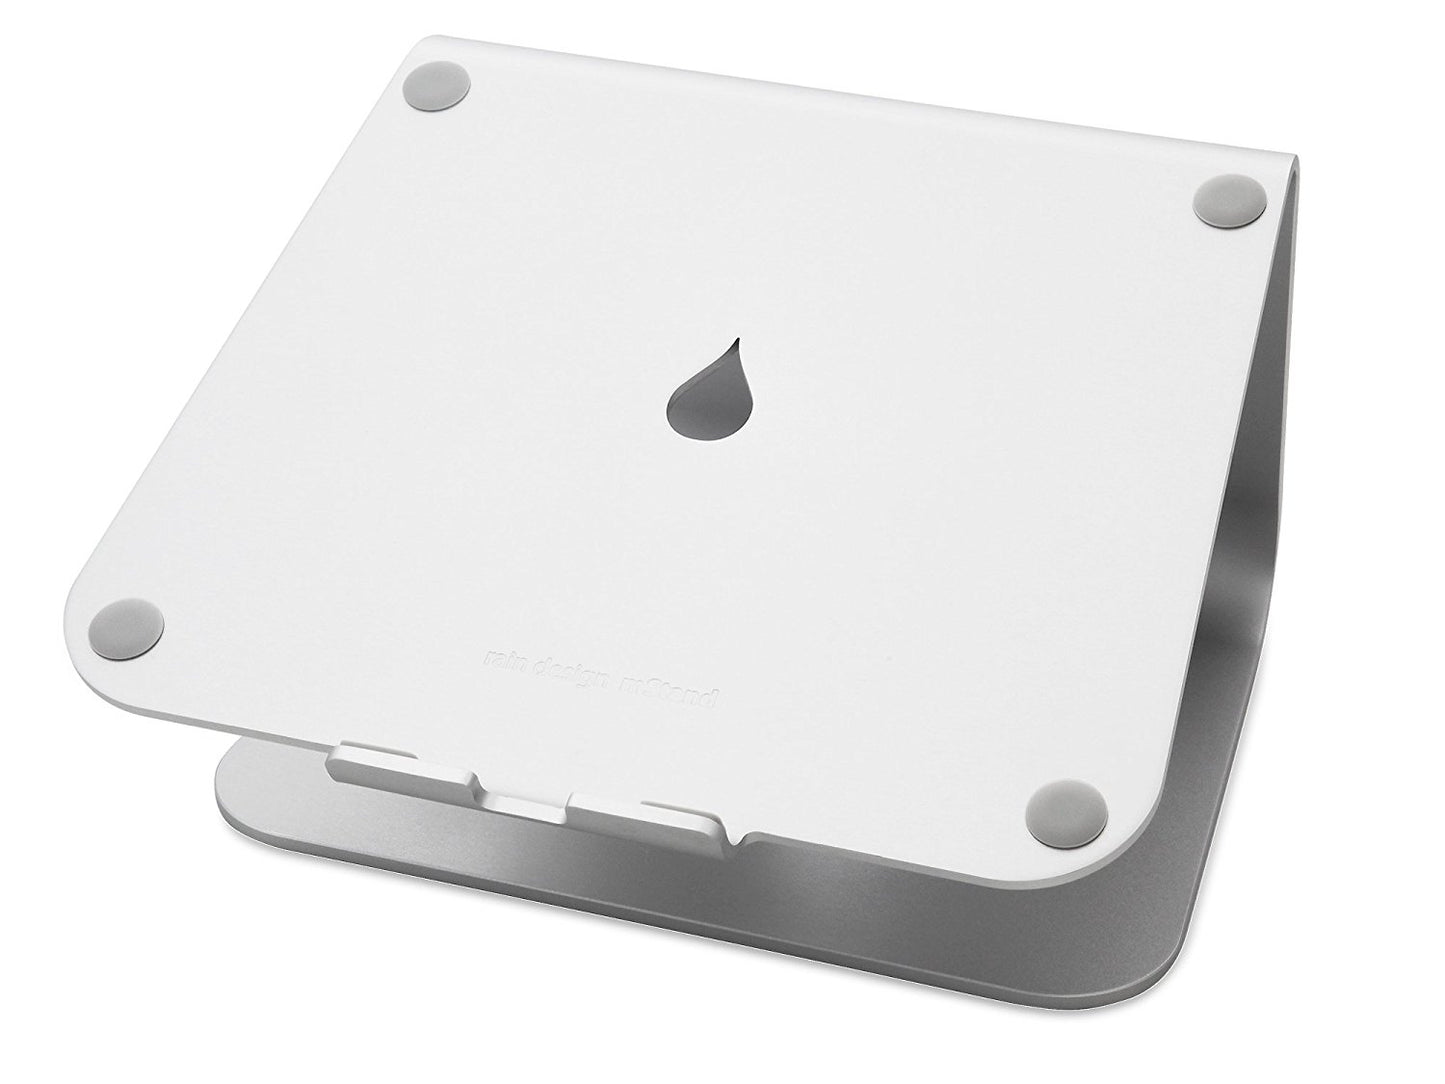 Rain Design mStand for MacBooks - The Usual